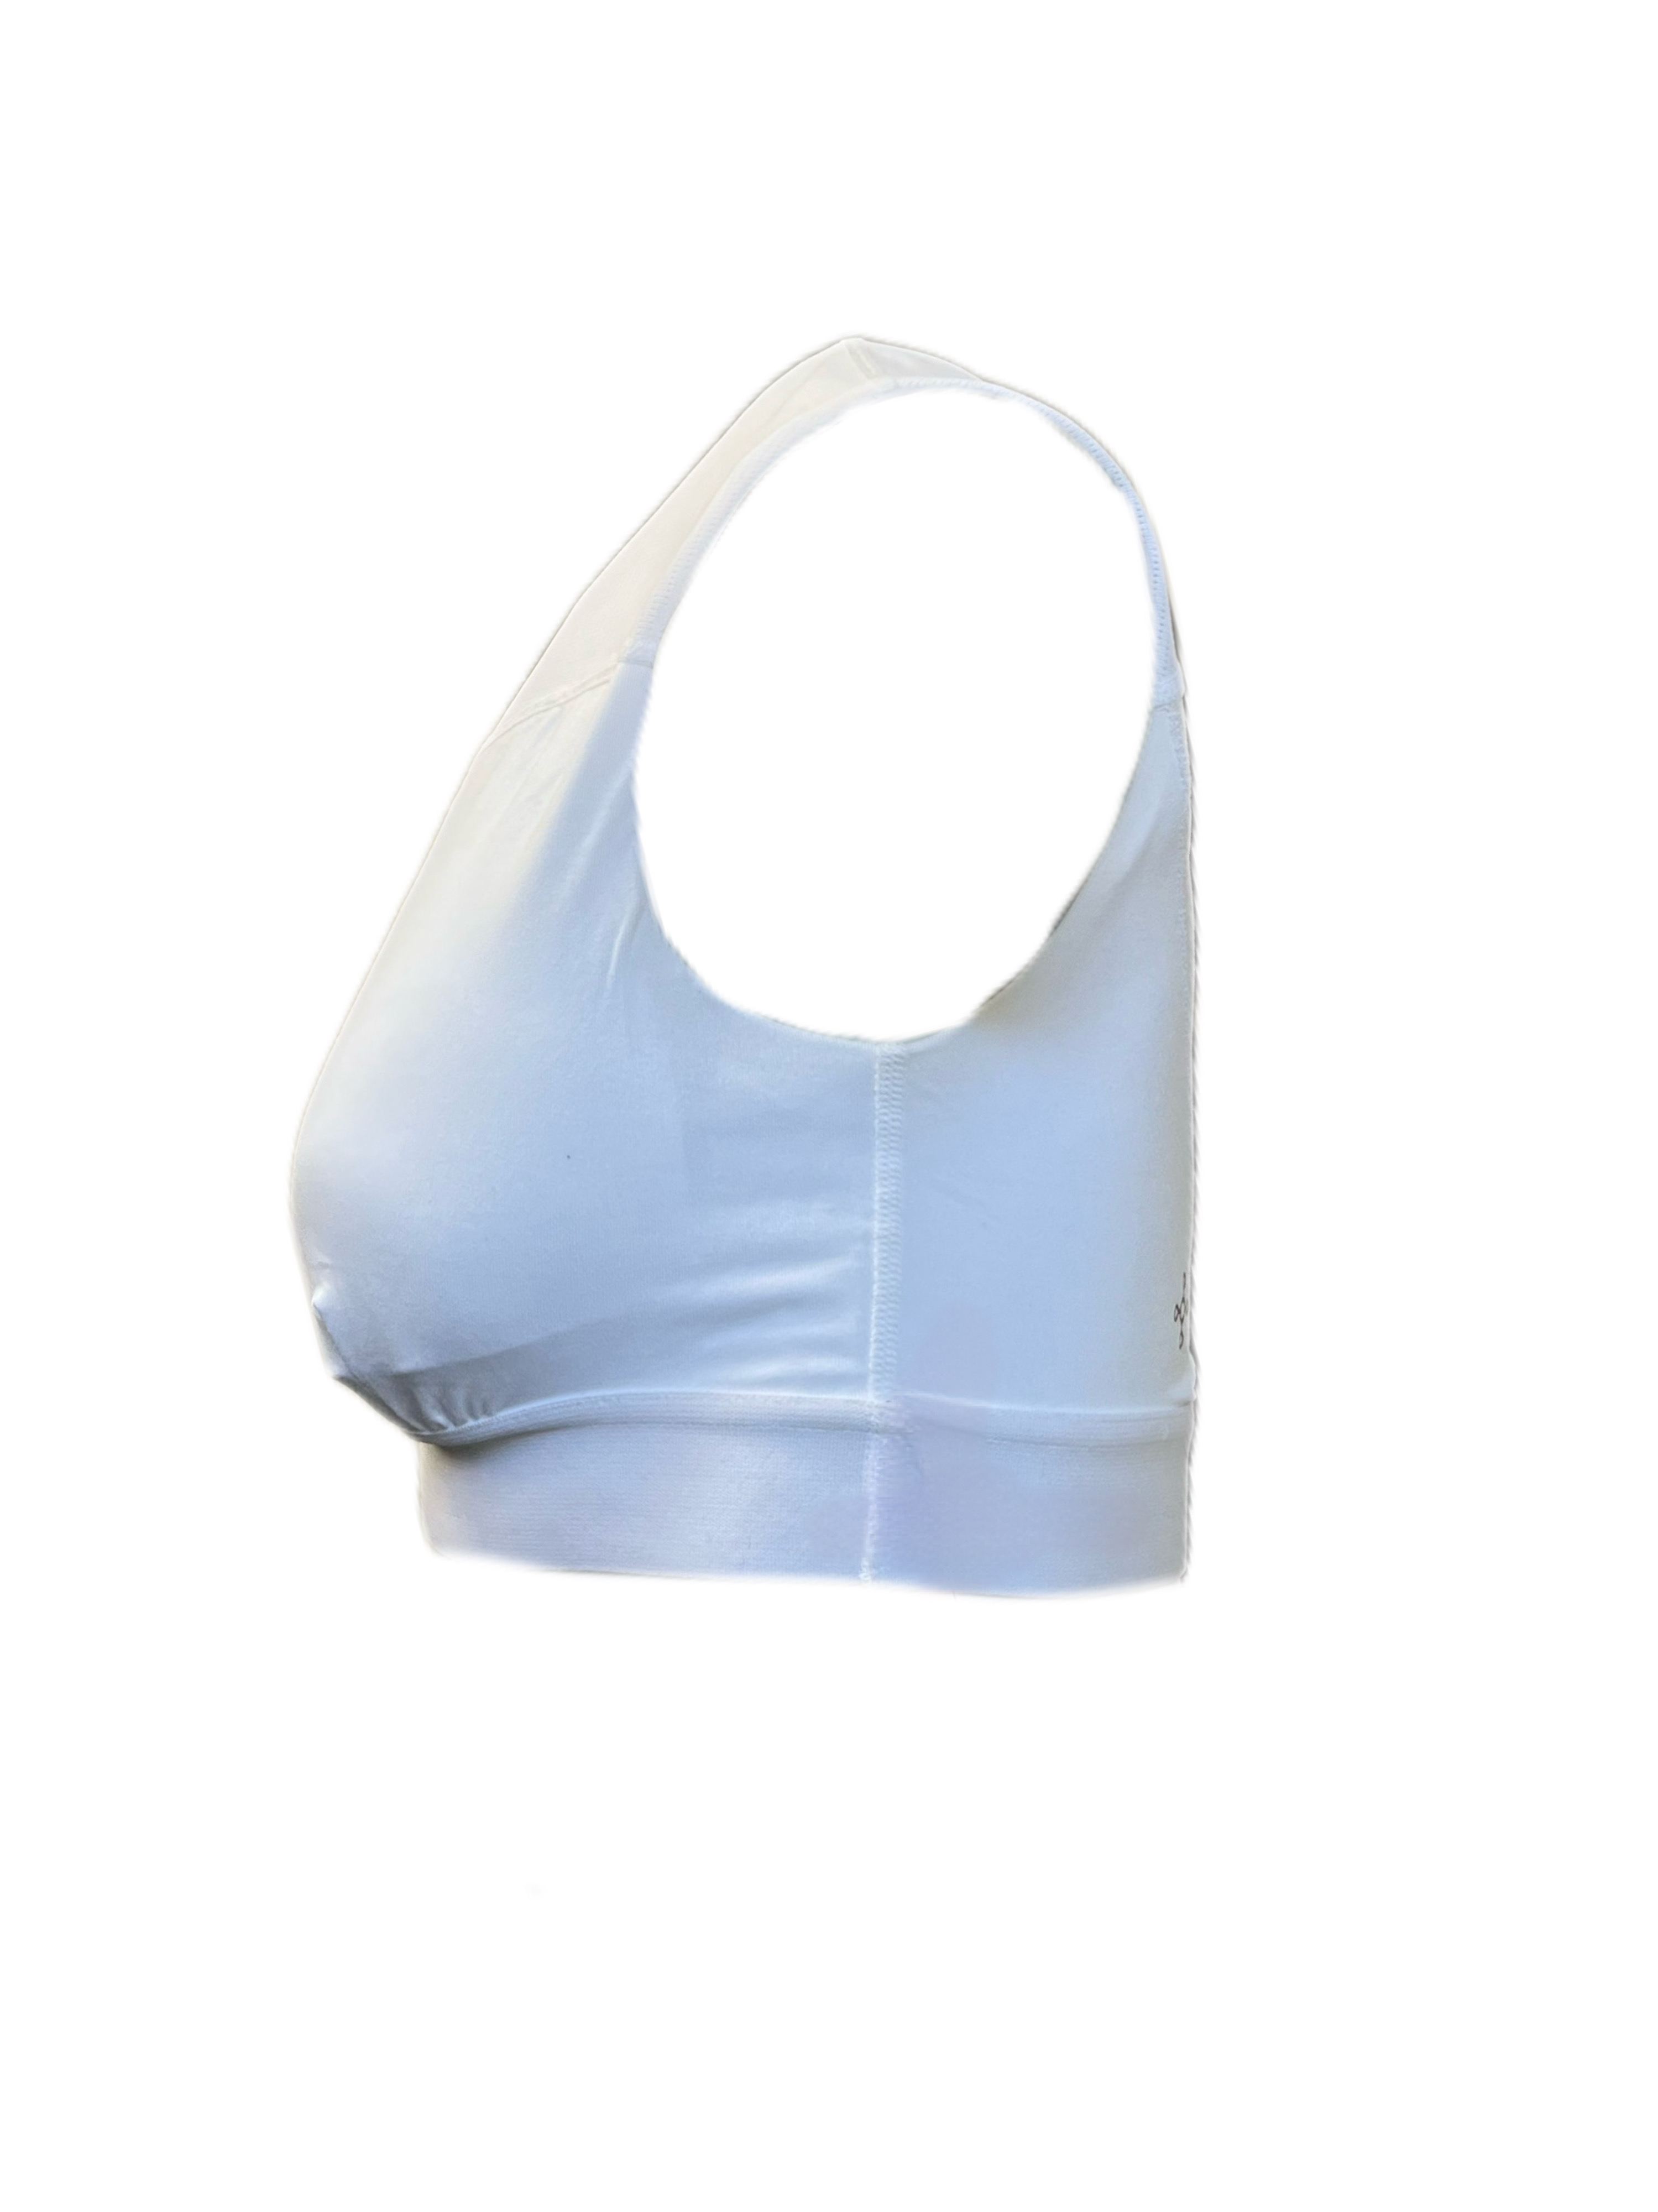 TOMMIE COPPER Womens White Shoulder Support Comfort Bra